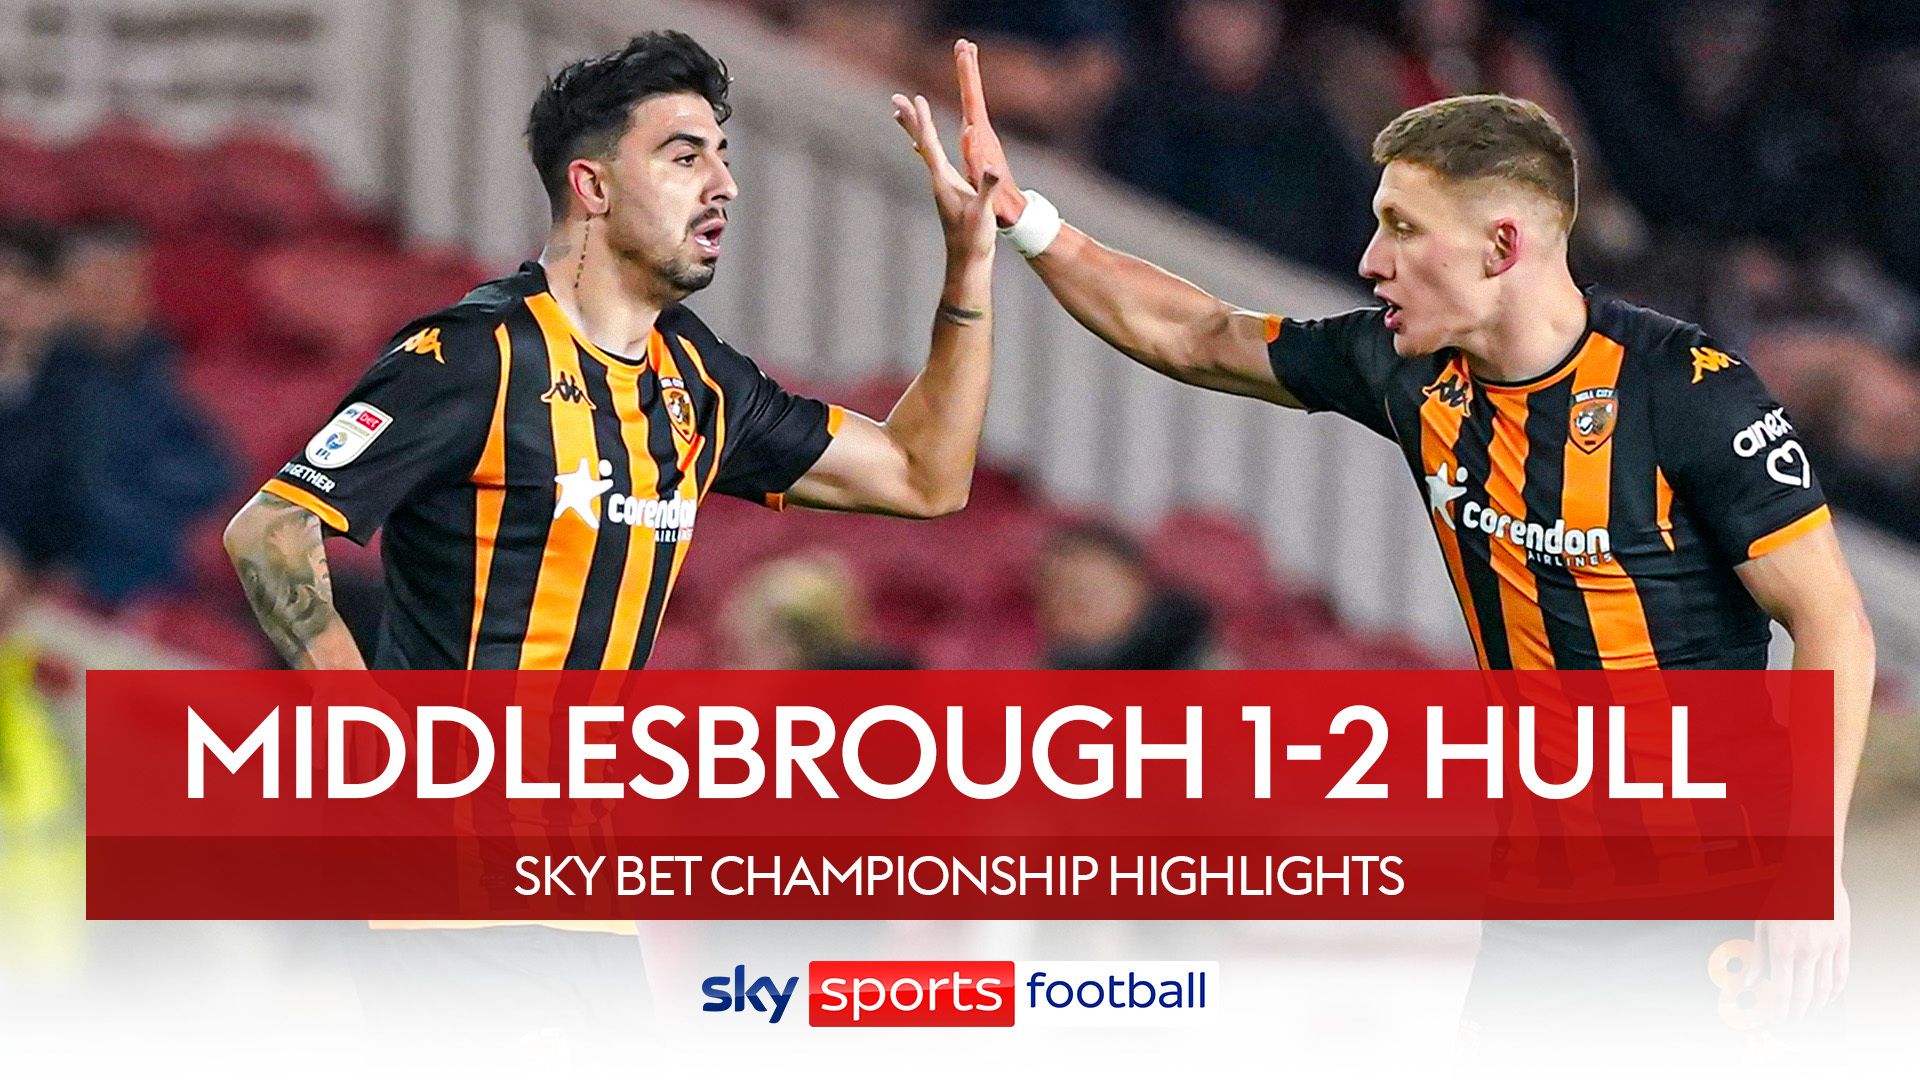 Middlesbrough 1-2 Hull